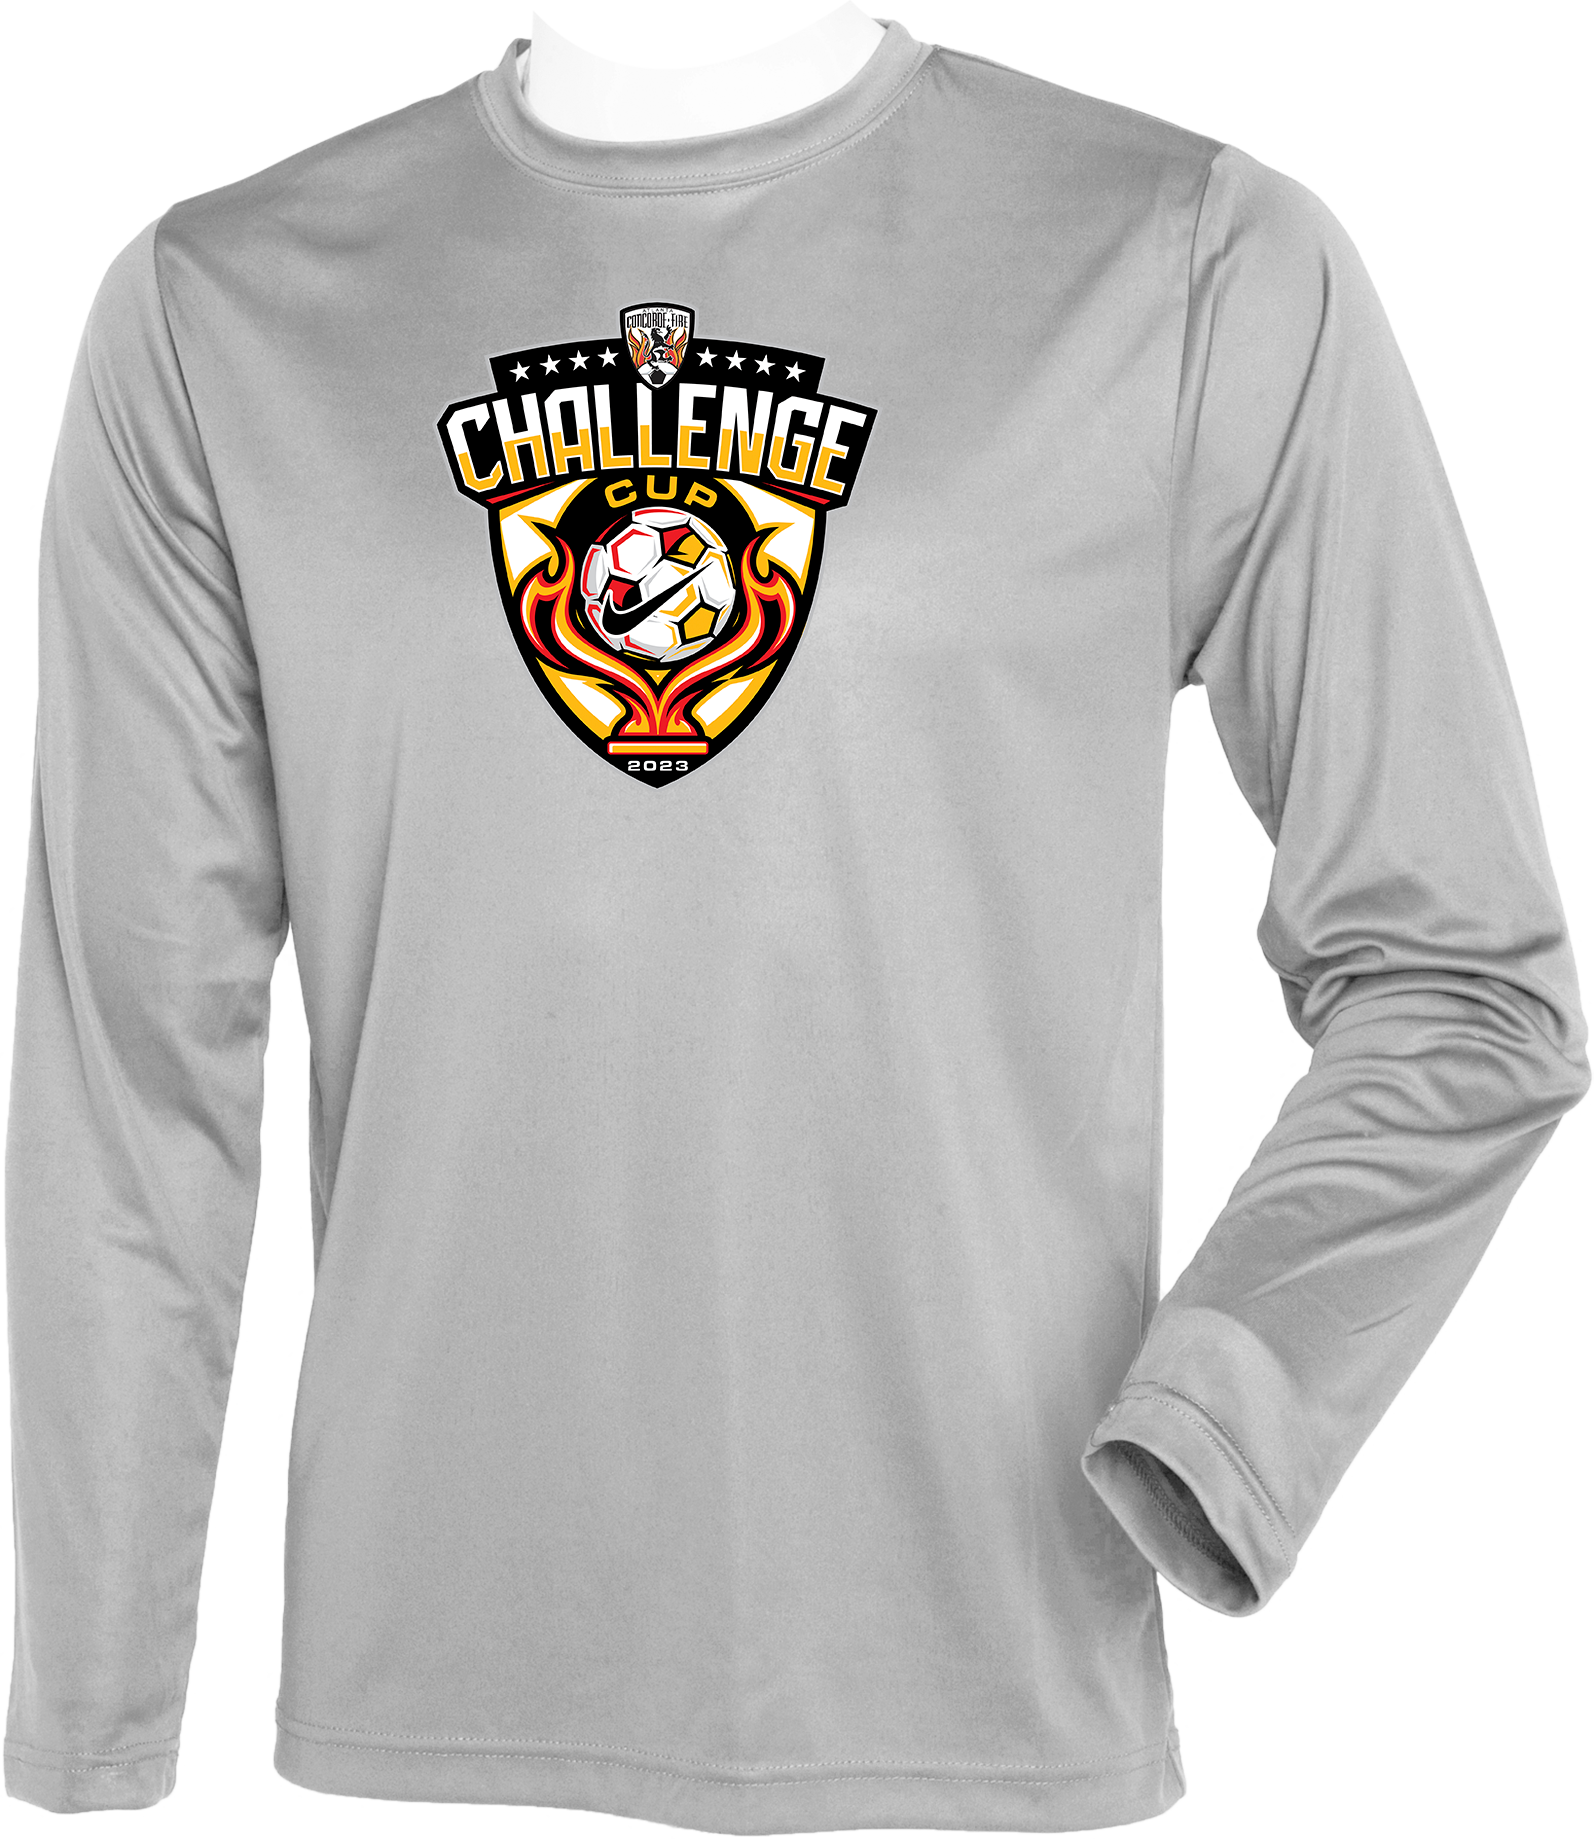 PERFORMANCE SHIRTS - 2023 Challenge Cup